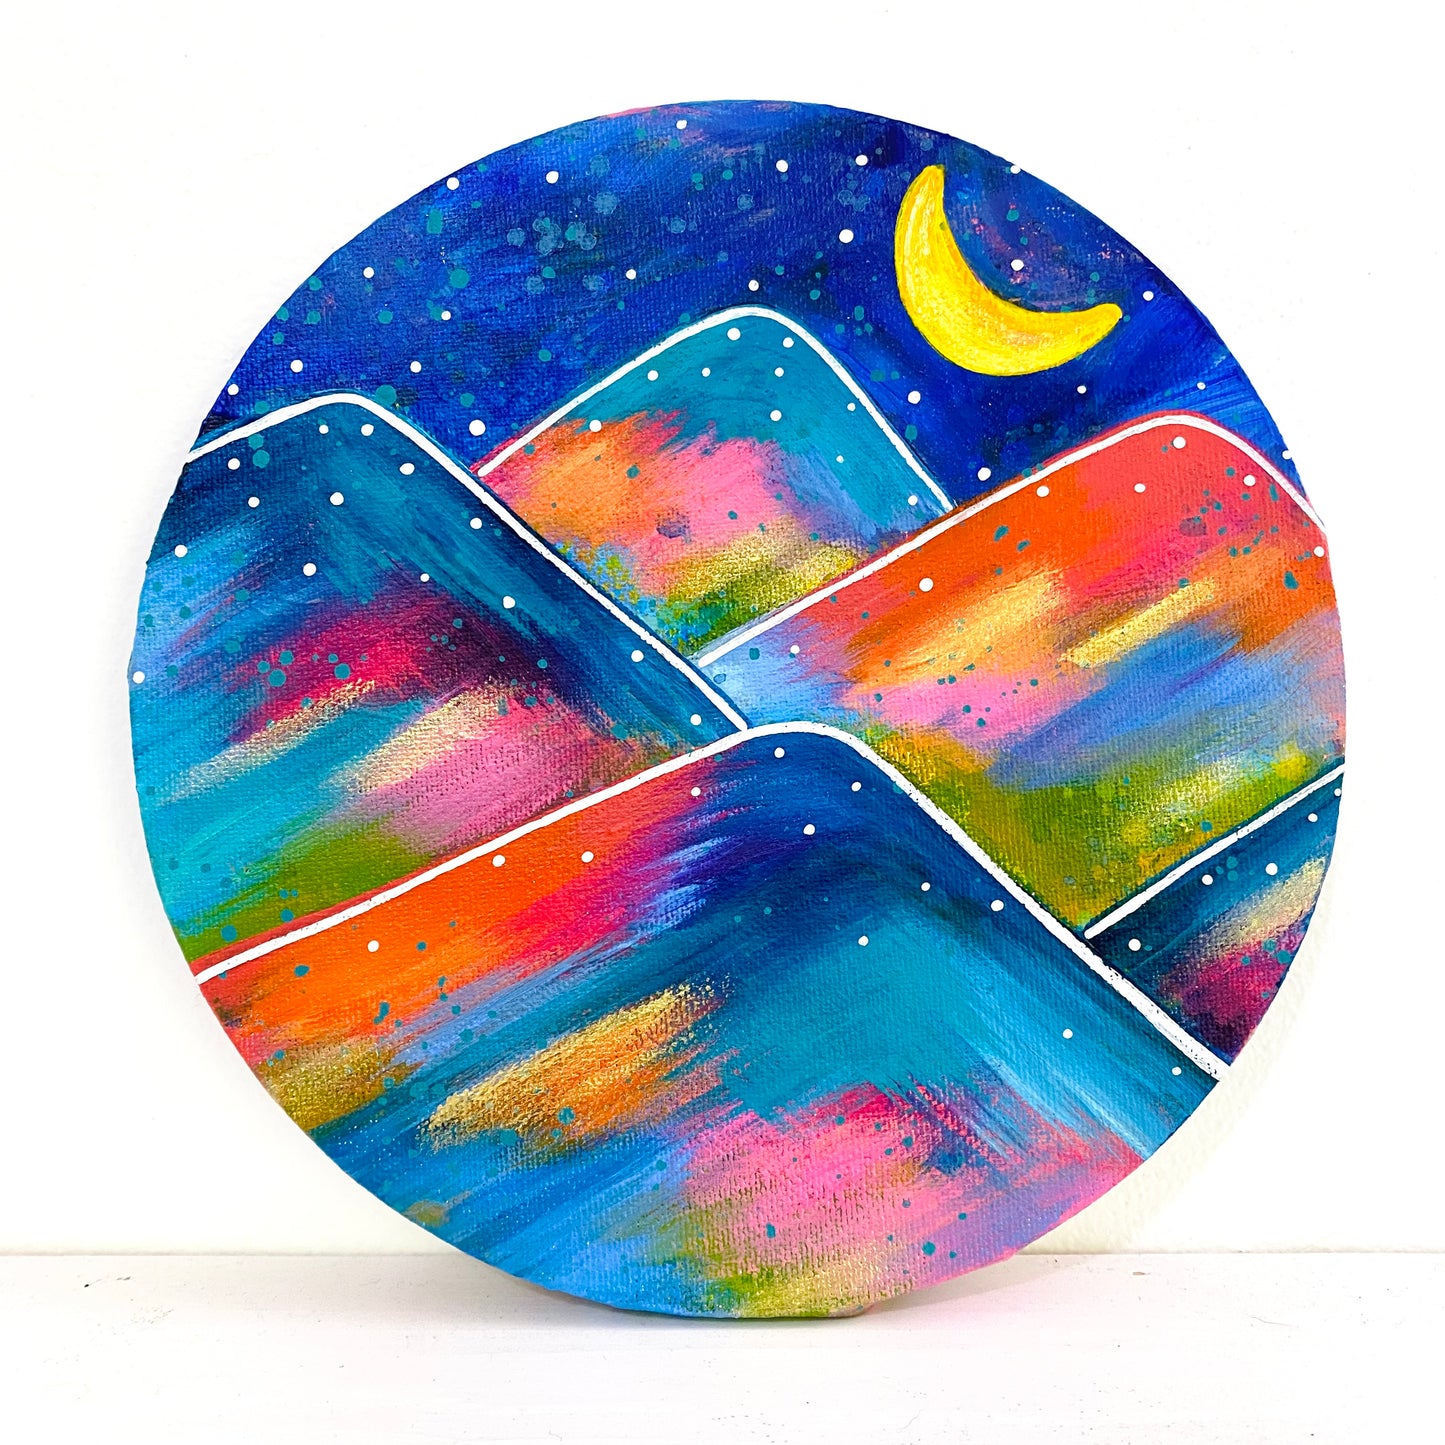 "To the Moon and Back" 8 inch diamater circle Original Mountain Inspired Painting on Canvas with painted sides